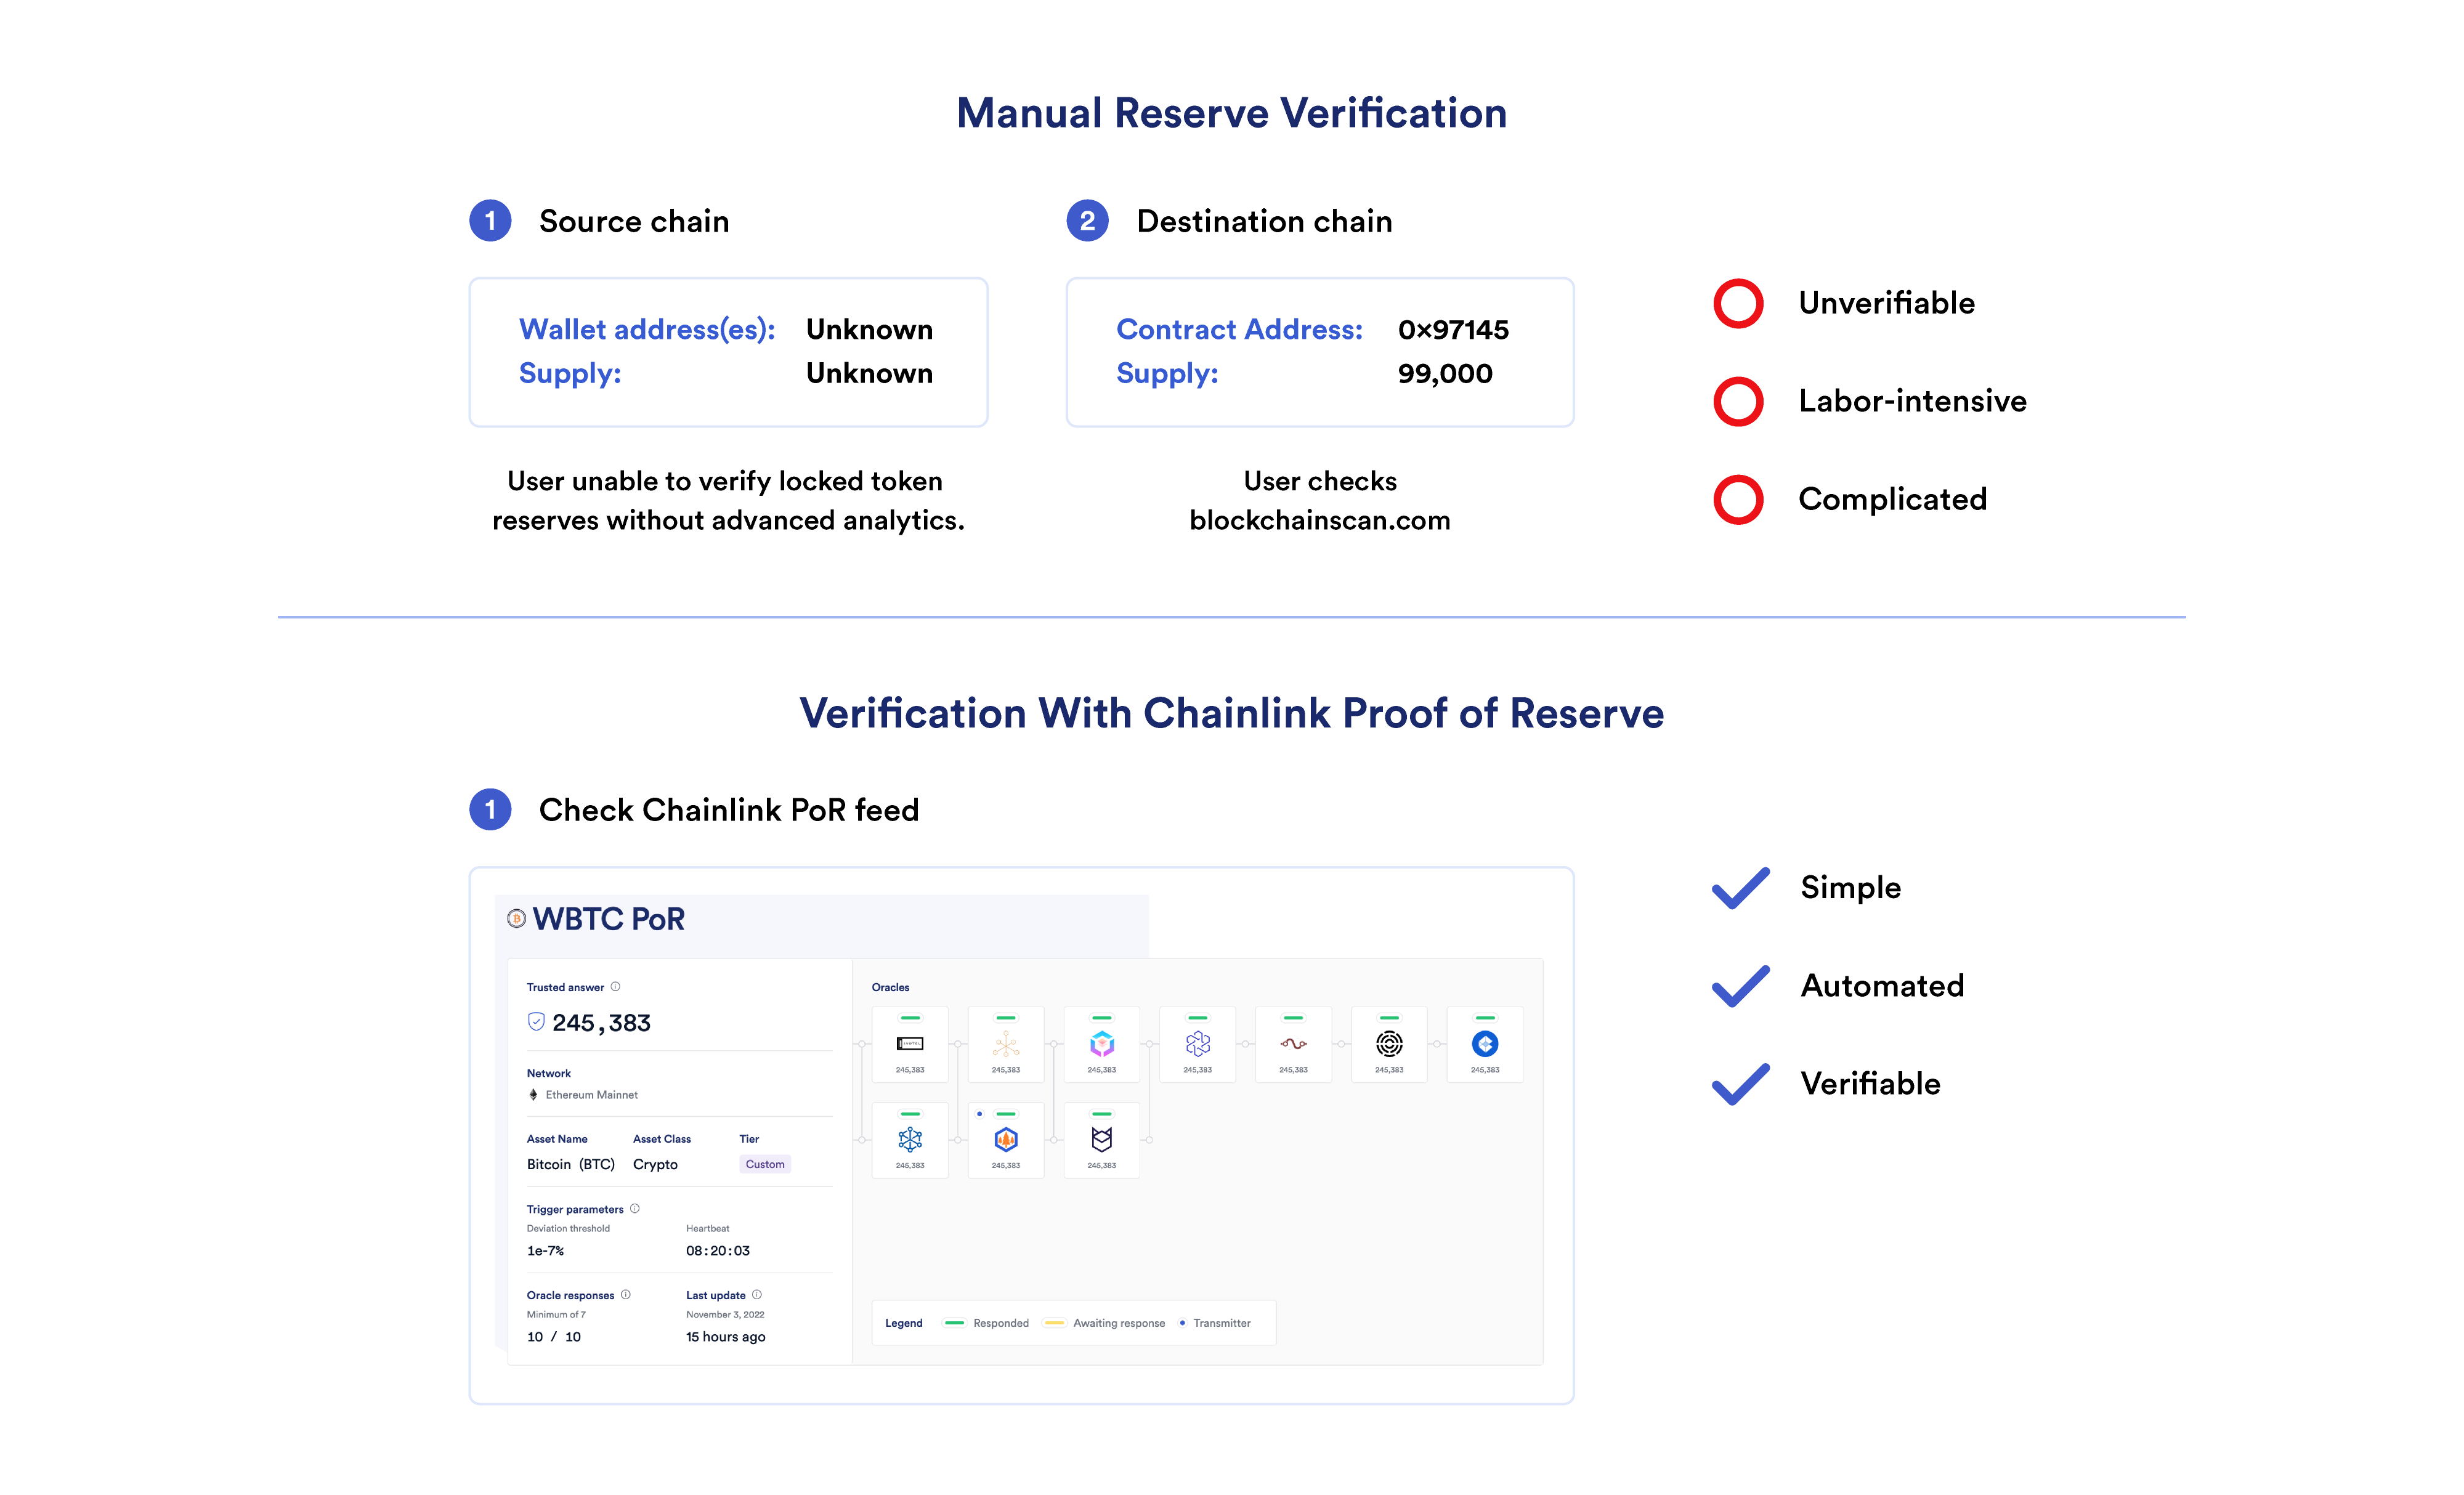 An infographic showcasing the benefits of Chainlink Proof of Reserve compared to manual verification.